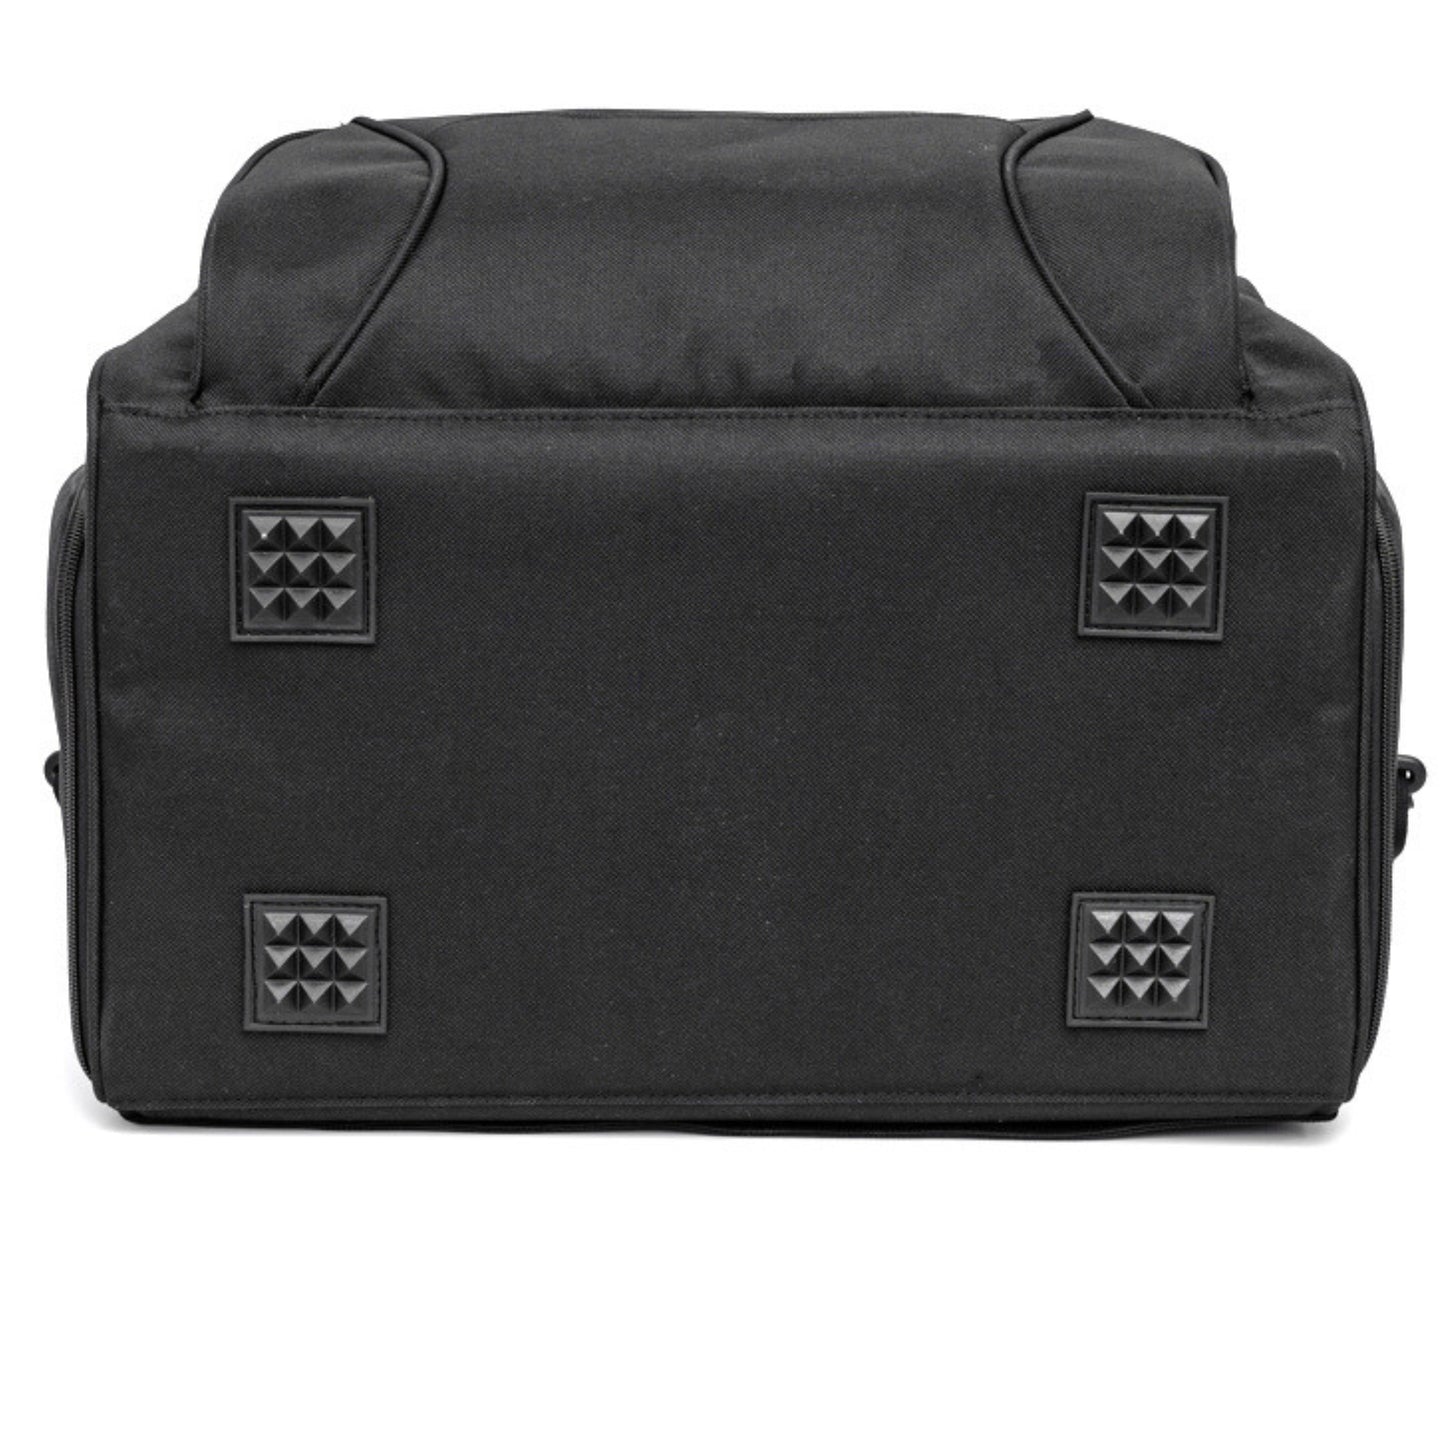 Large Insulated Cooler Lunch Bag (15x12x9 in). Heavy Duty 900D Oxford Fabric, Thick Insulation, Many Pockets, Large Zipper, Padded-Removable Straps.